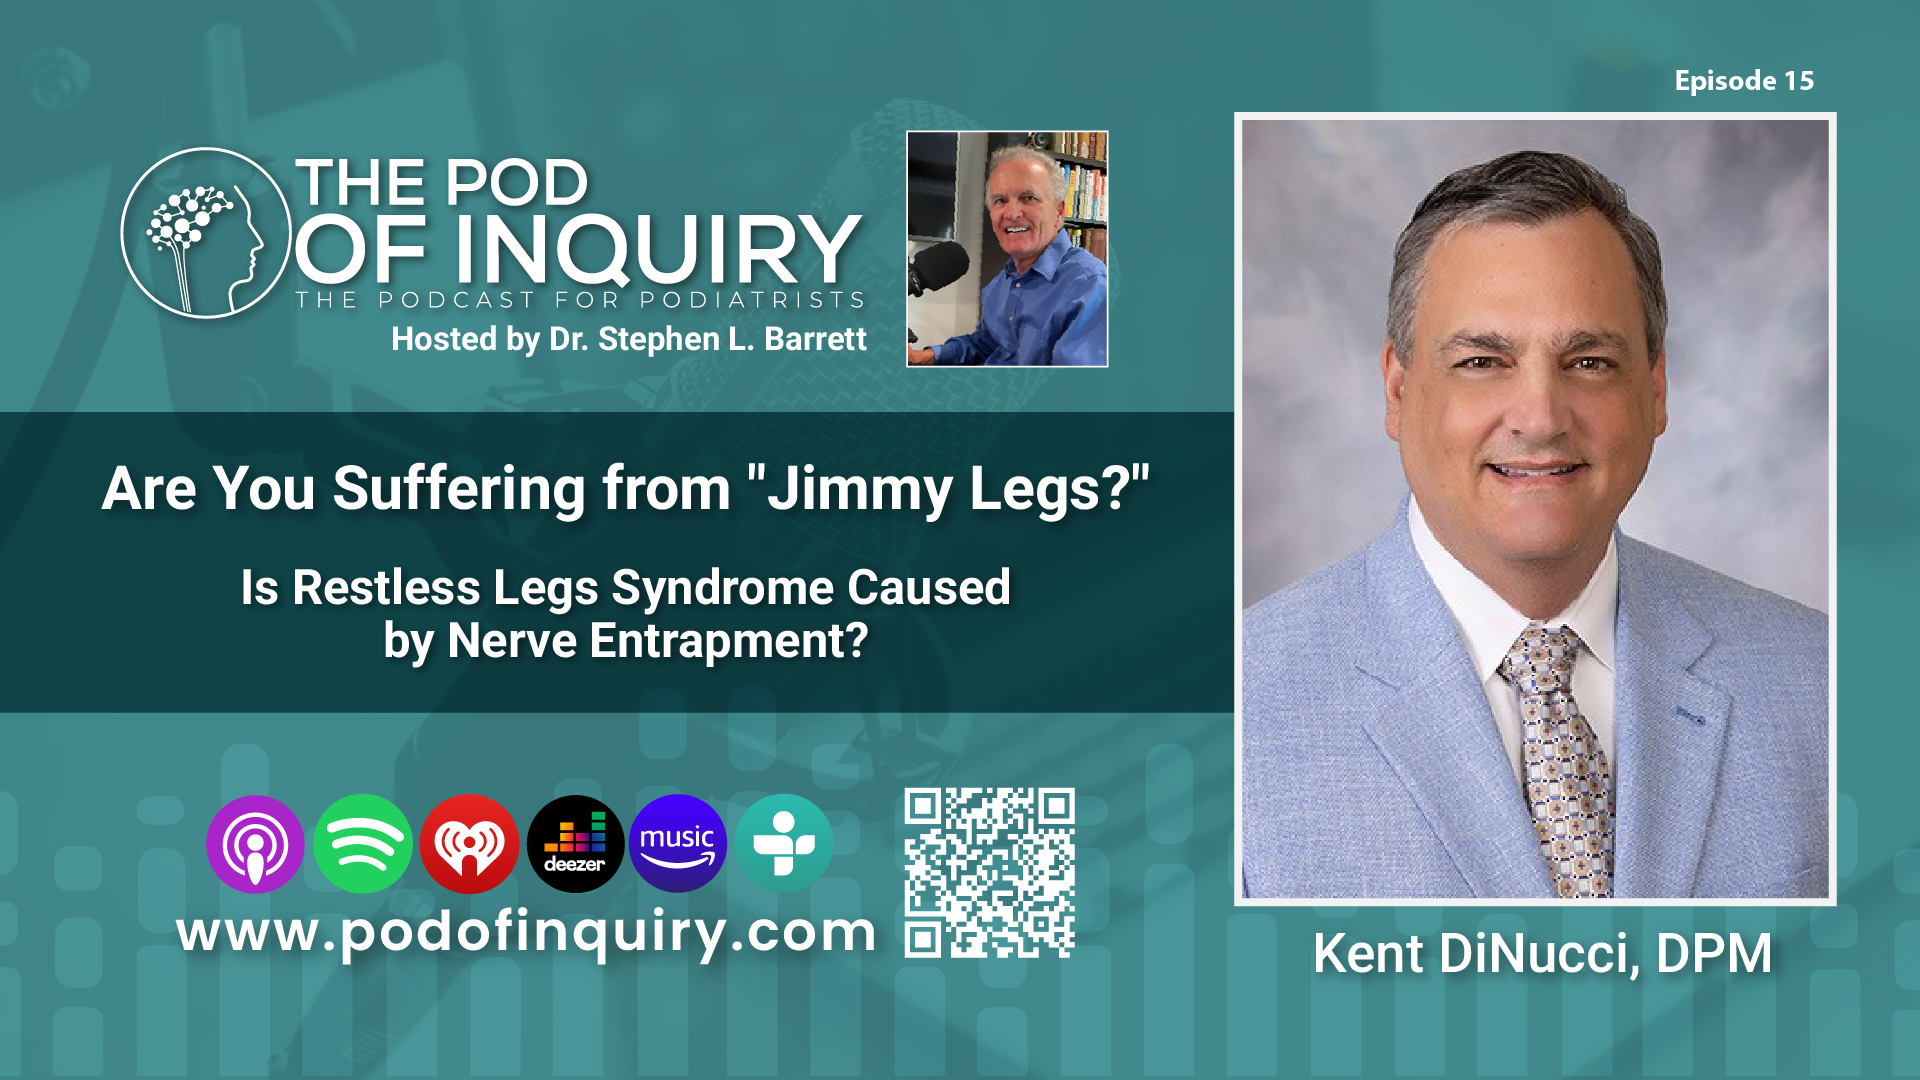 Are You Suffering from "Jimmy Legs?" Is Restless Legs Syndrome Caused by Nerve Entrapment?